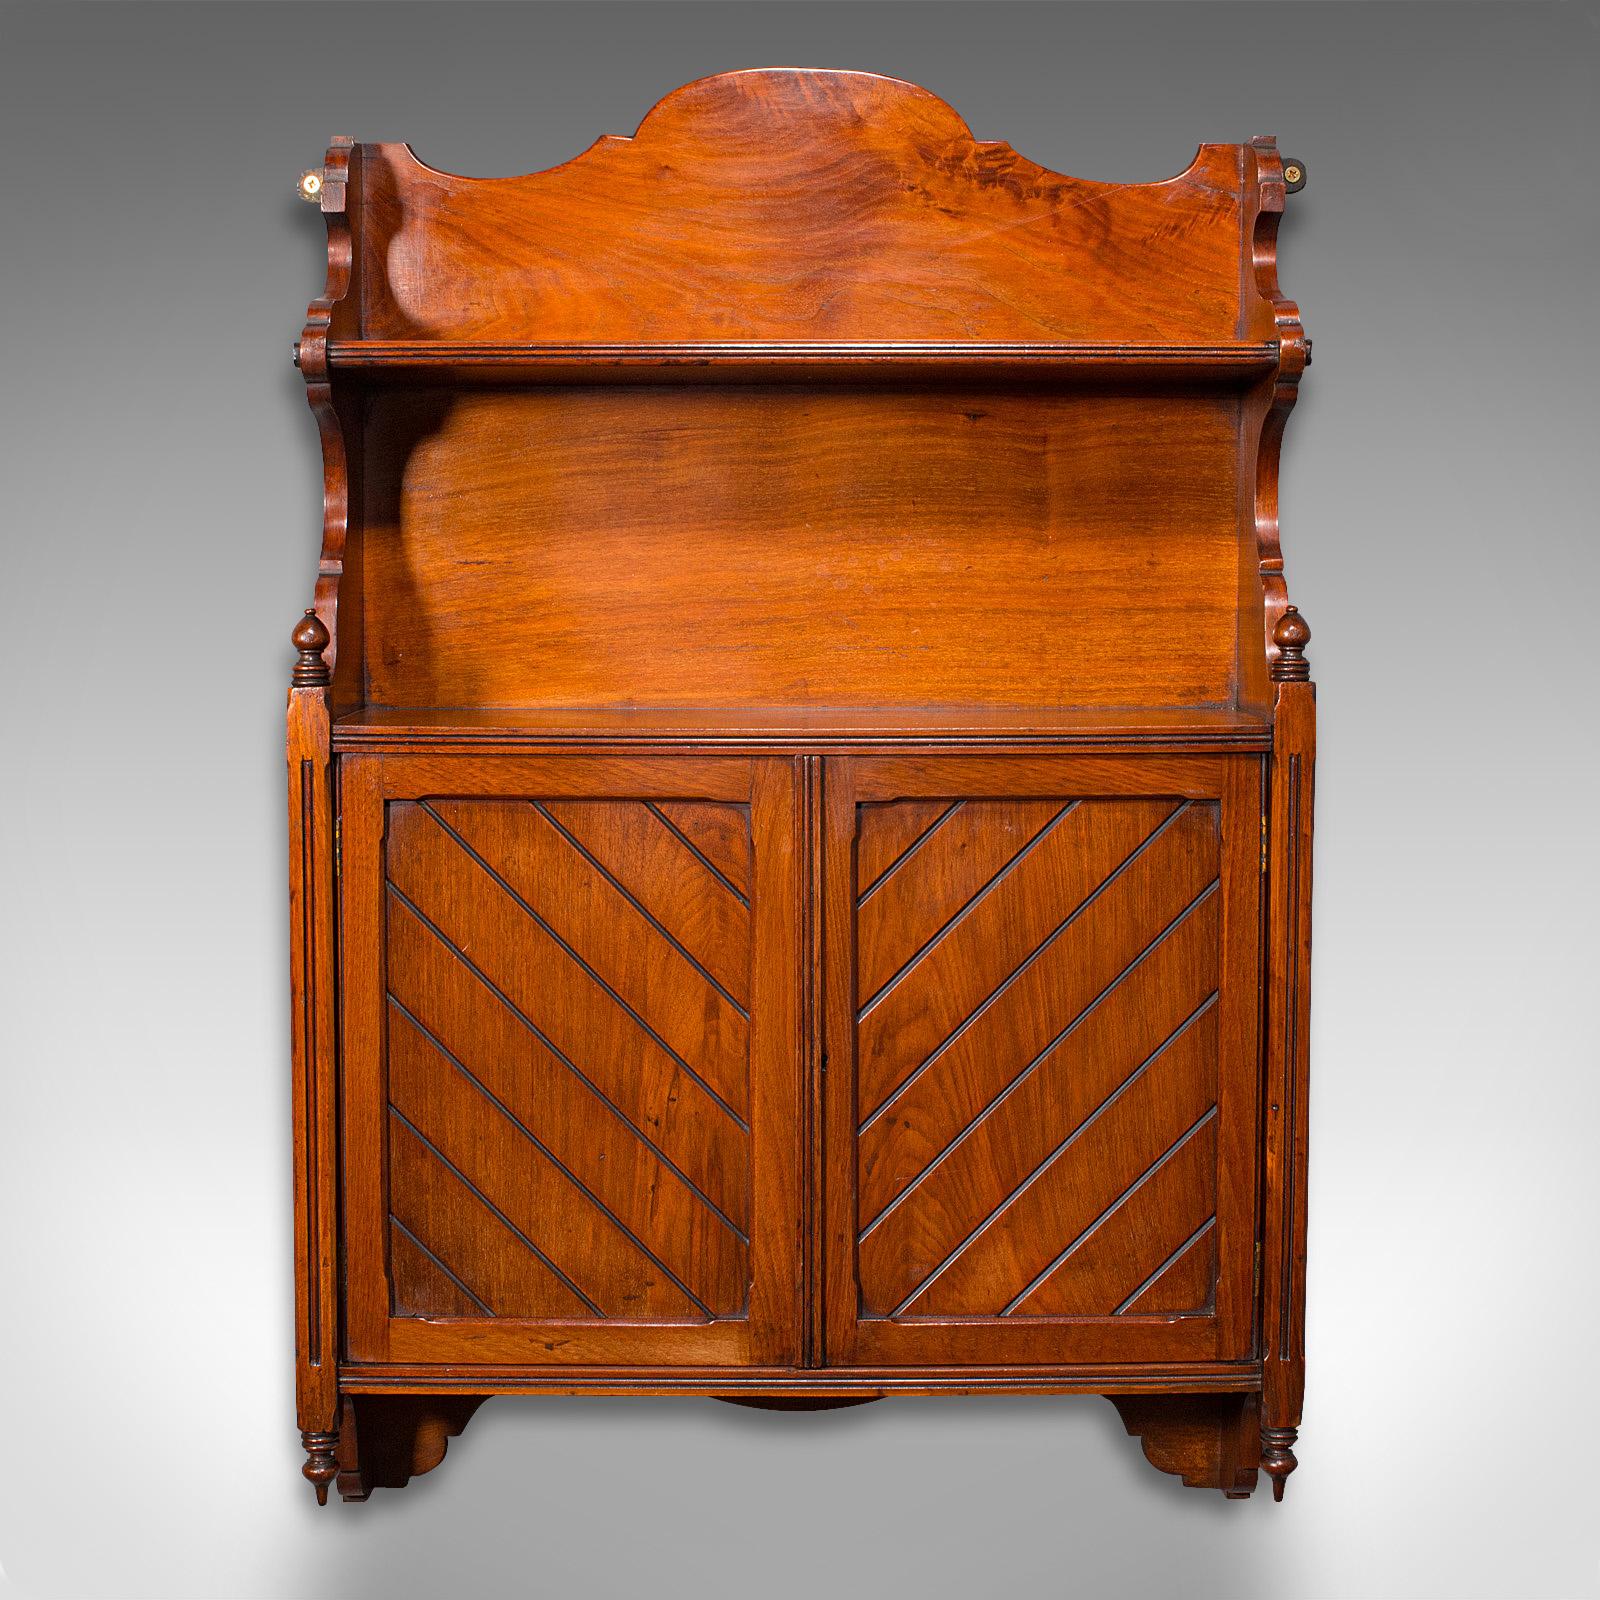 This is an antique wall-mounted cabinet. An English, mahogany hanging whatnot, dating to the Victorian period, circa 1880.

Delightfully presented cabinet with fine craftsmanship
Displays a desirable aged patina in good order
Select mahogany